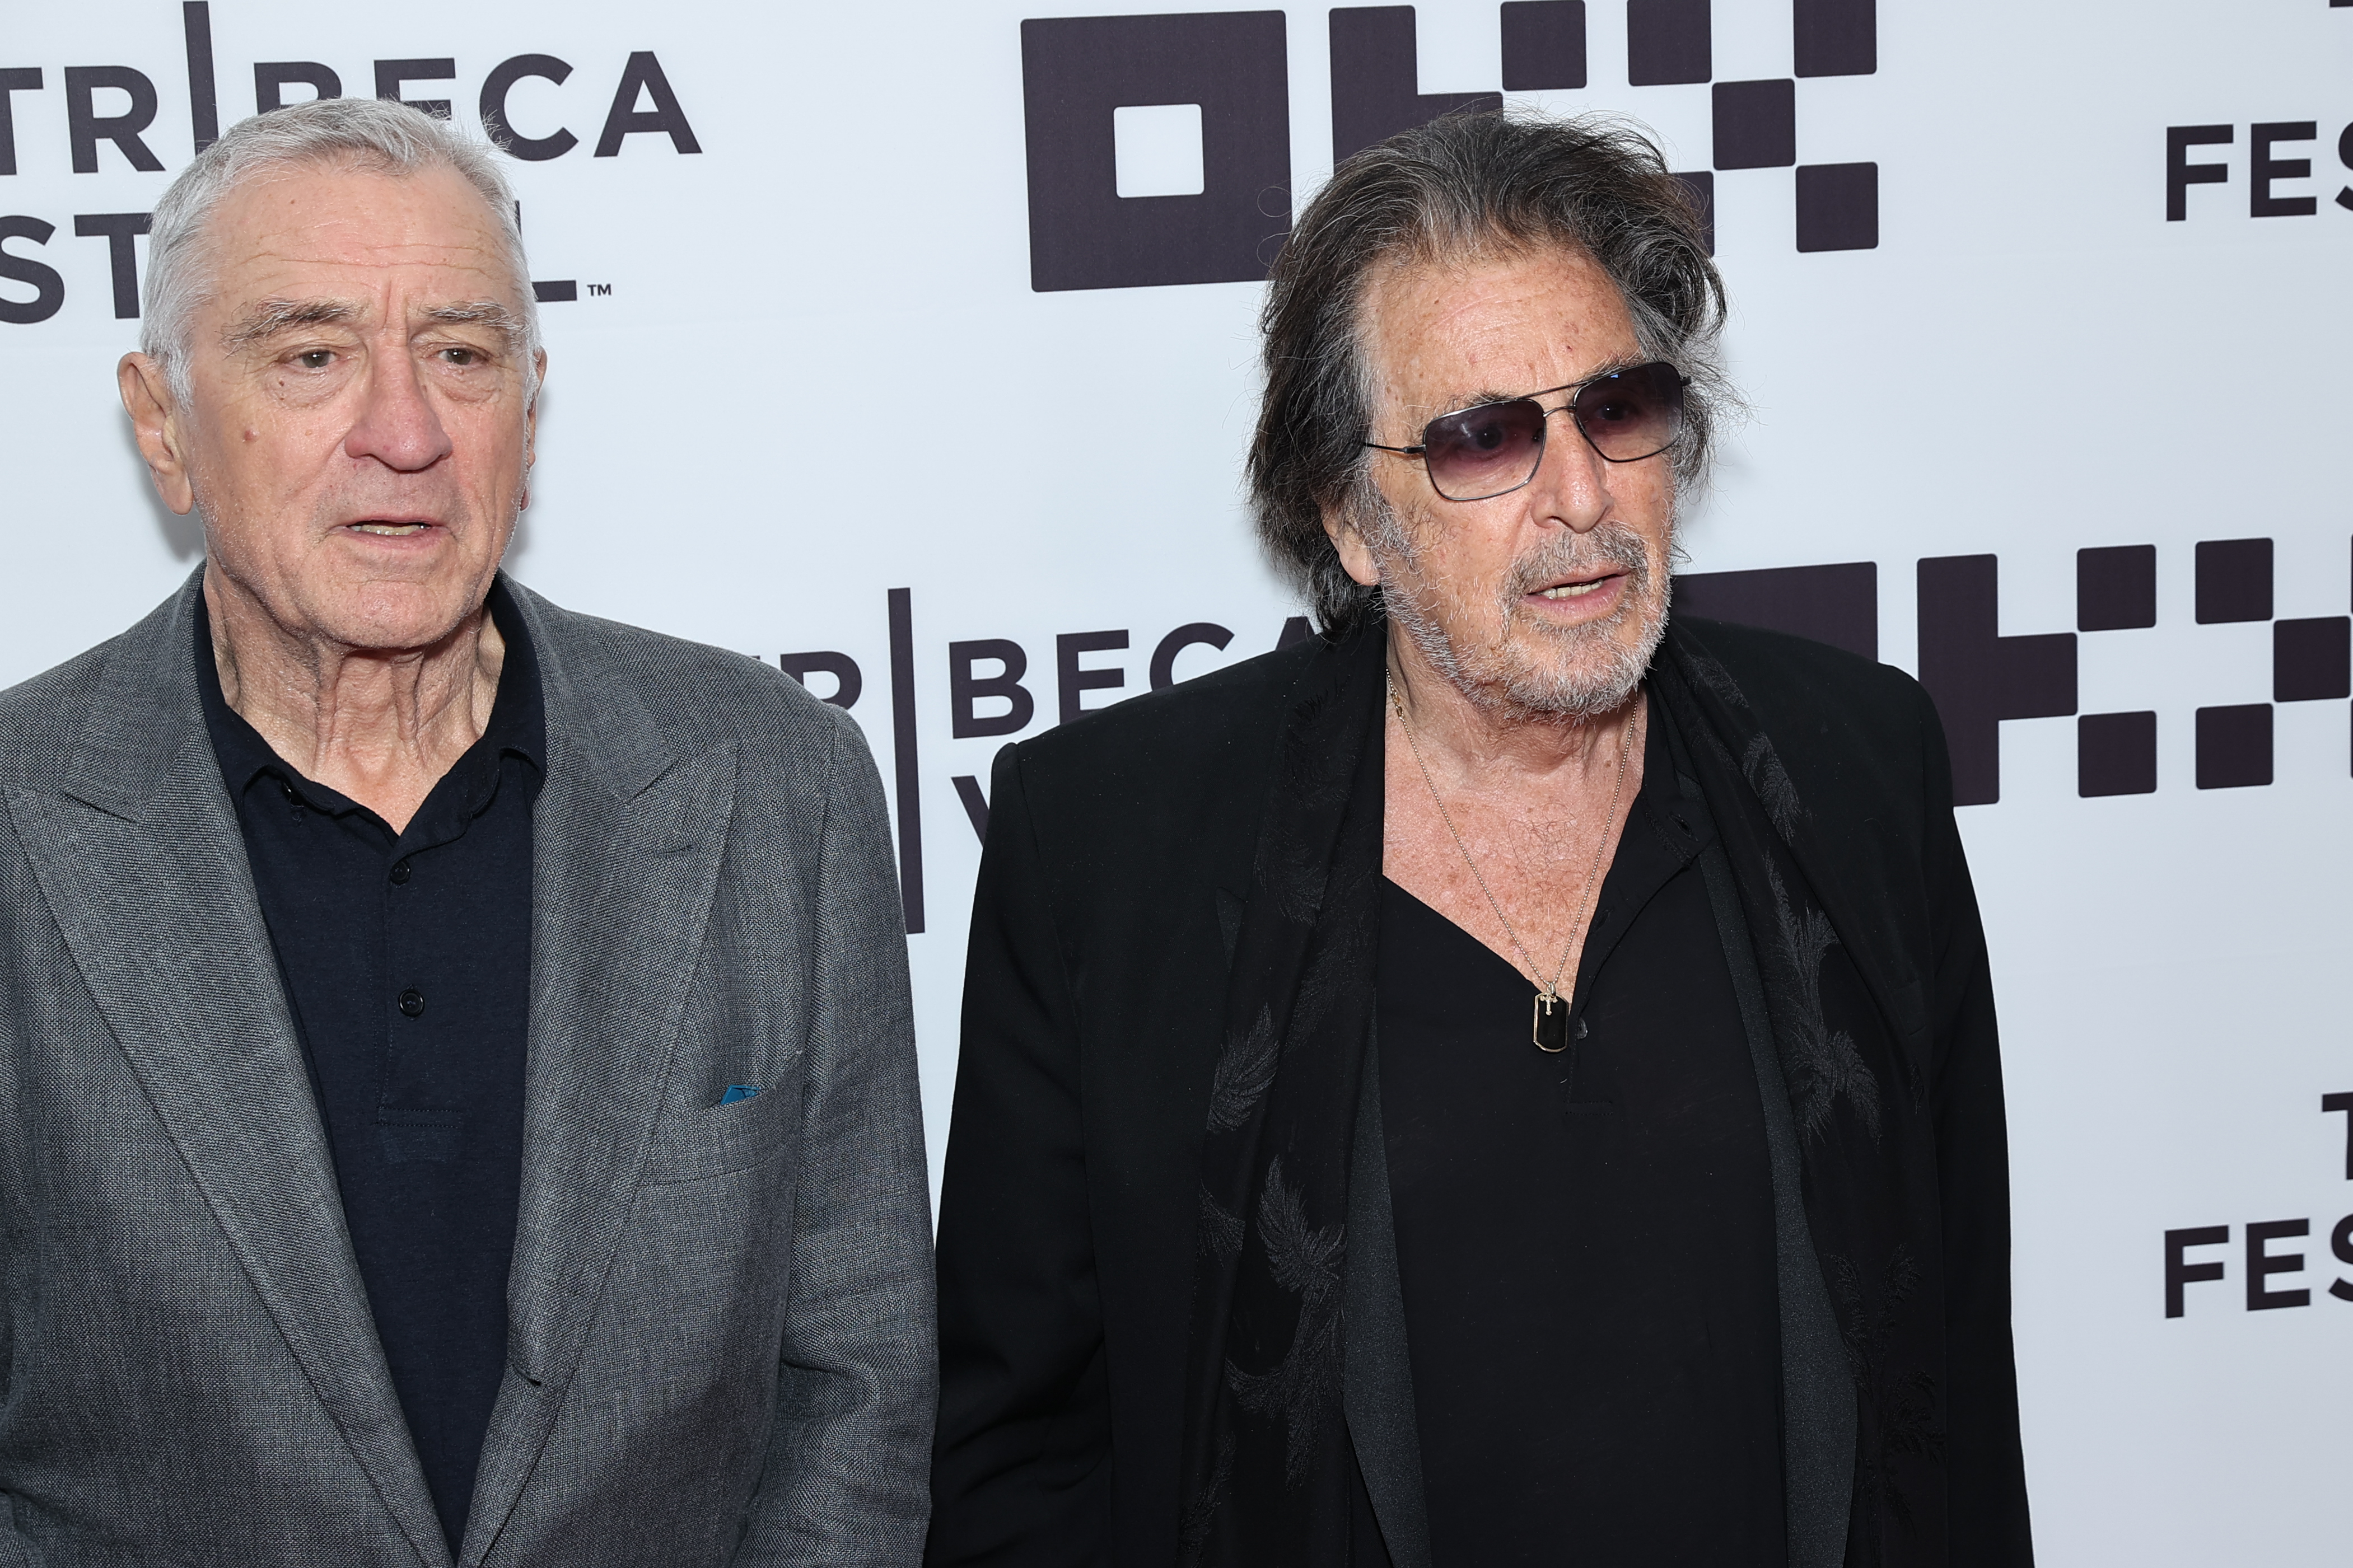 Actor Robert De Niro (L) and actor Al Pacino (R) pose on the Red Carpet of 'HEAT' at 2022 Tribeca Festival in New York City, United States on June 17, 2022 | Source: Getty Images